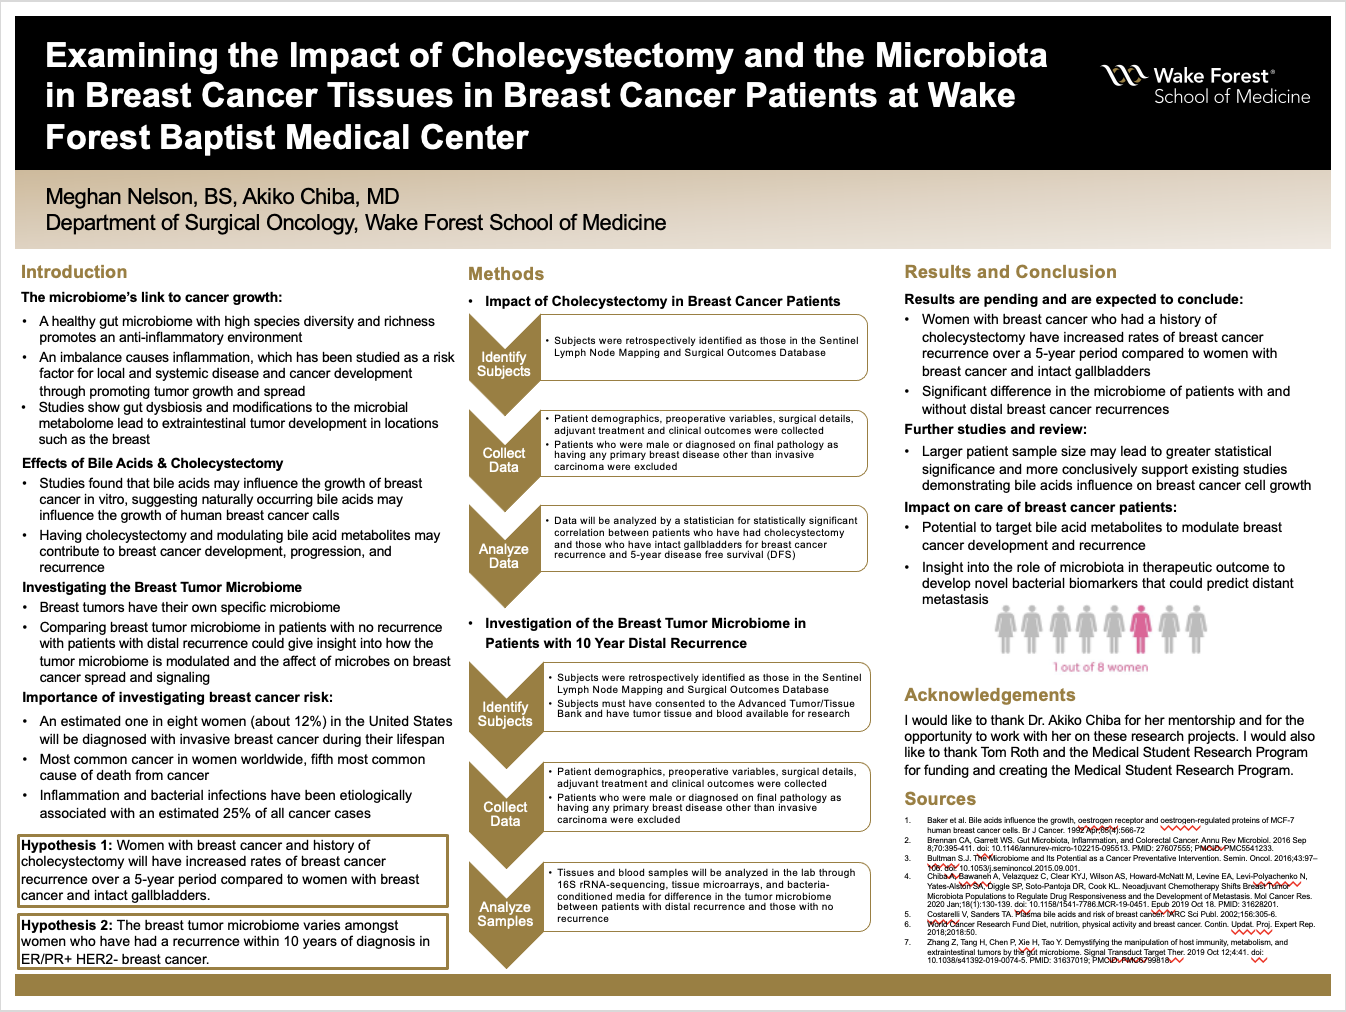 Showcase Image for Examining the Impact of Cholecystectomy and the Microbiota in Breast Cancer Tissues in Breast Cancer Patients at Wake Forest Baptist Medical Center